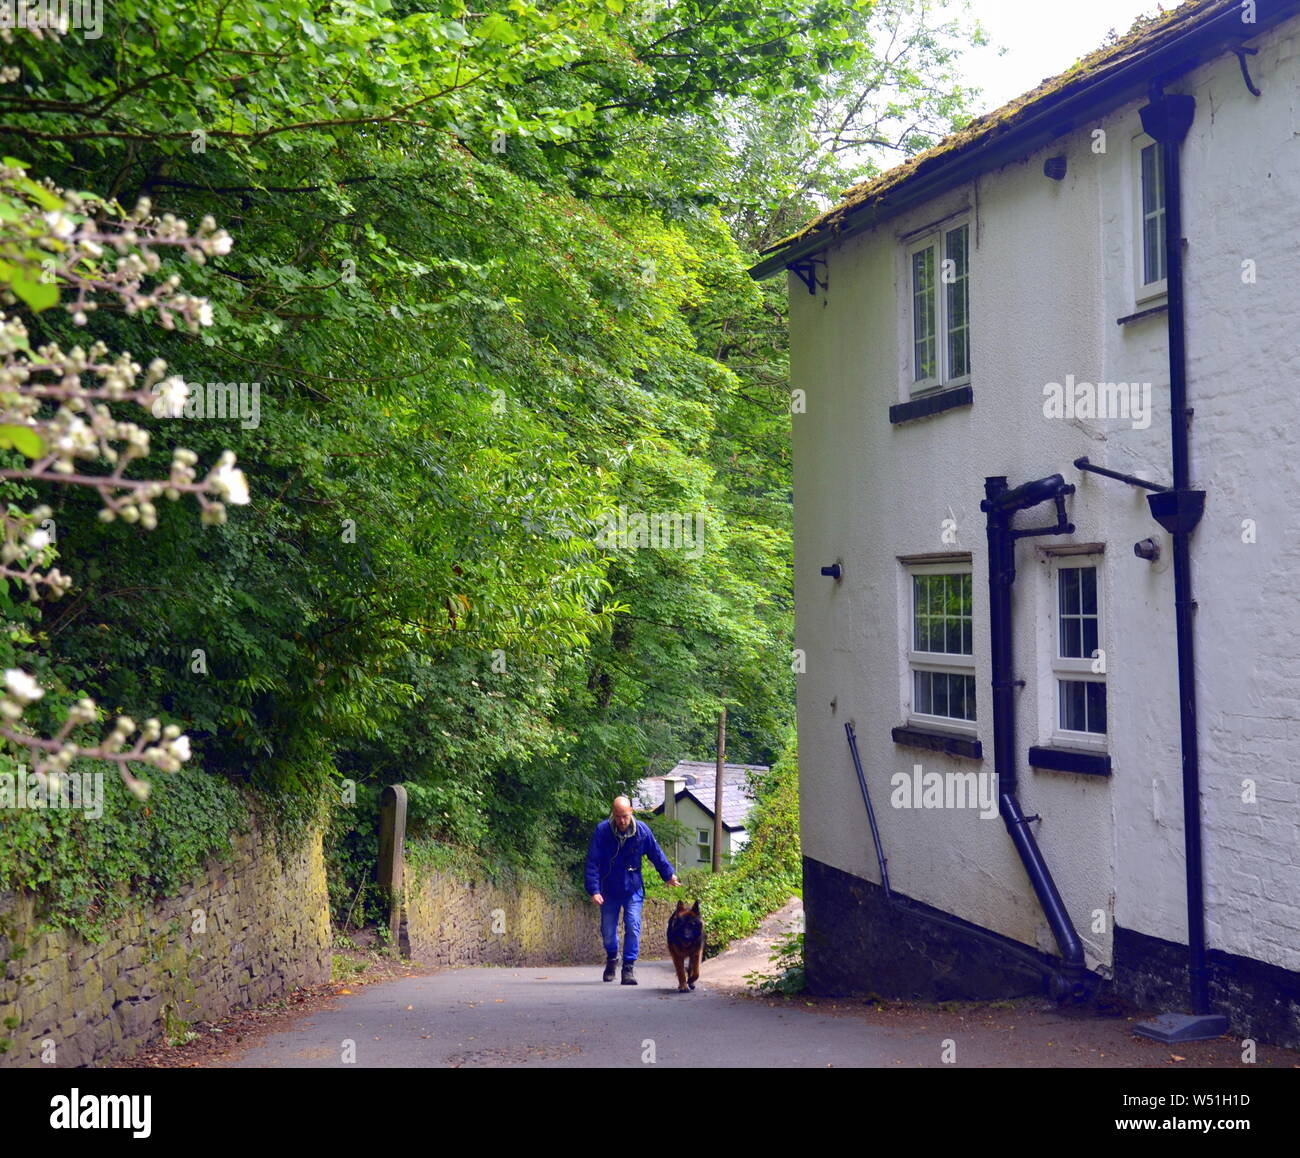 A man walking a dog in a lane near Marple, Stockport, uk on a Spring day Stock Photo